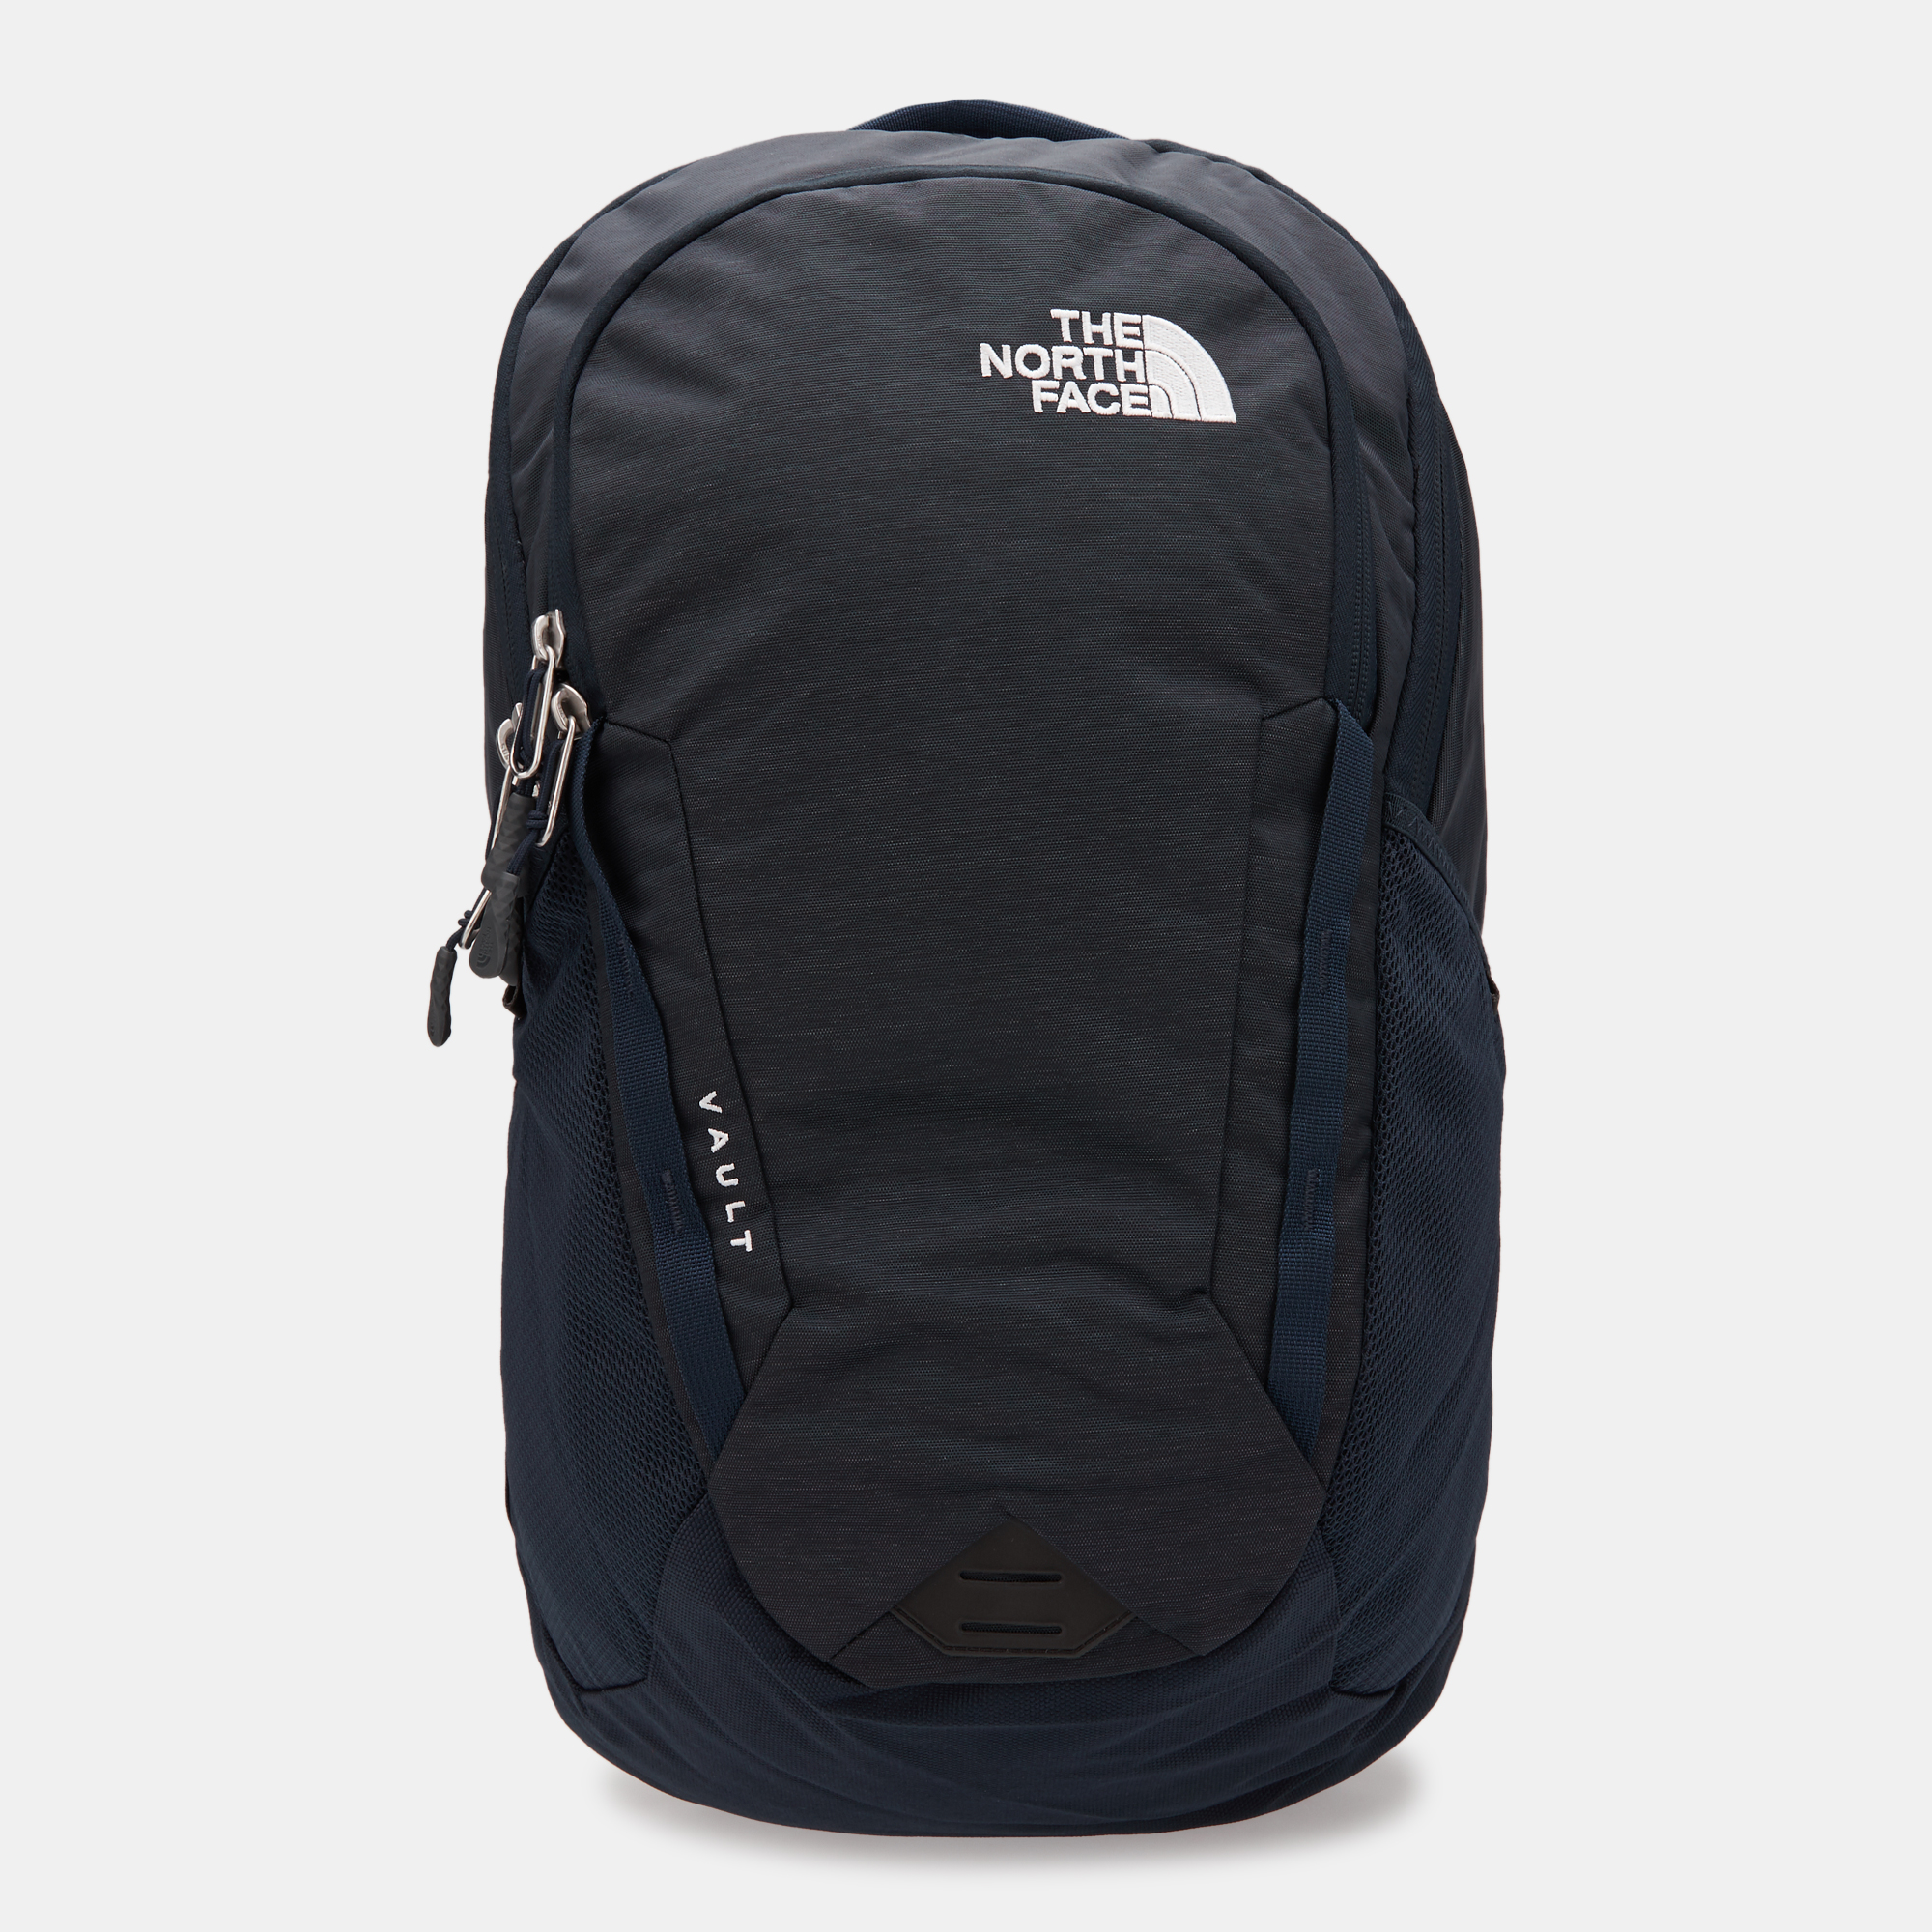 Buy The North Face Vault Backpack Online in Saudi Arabia | SSS